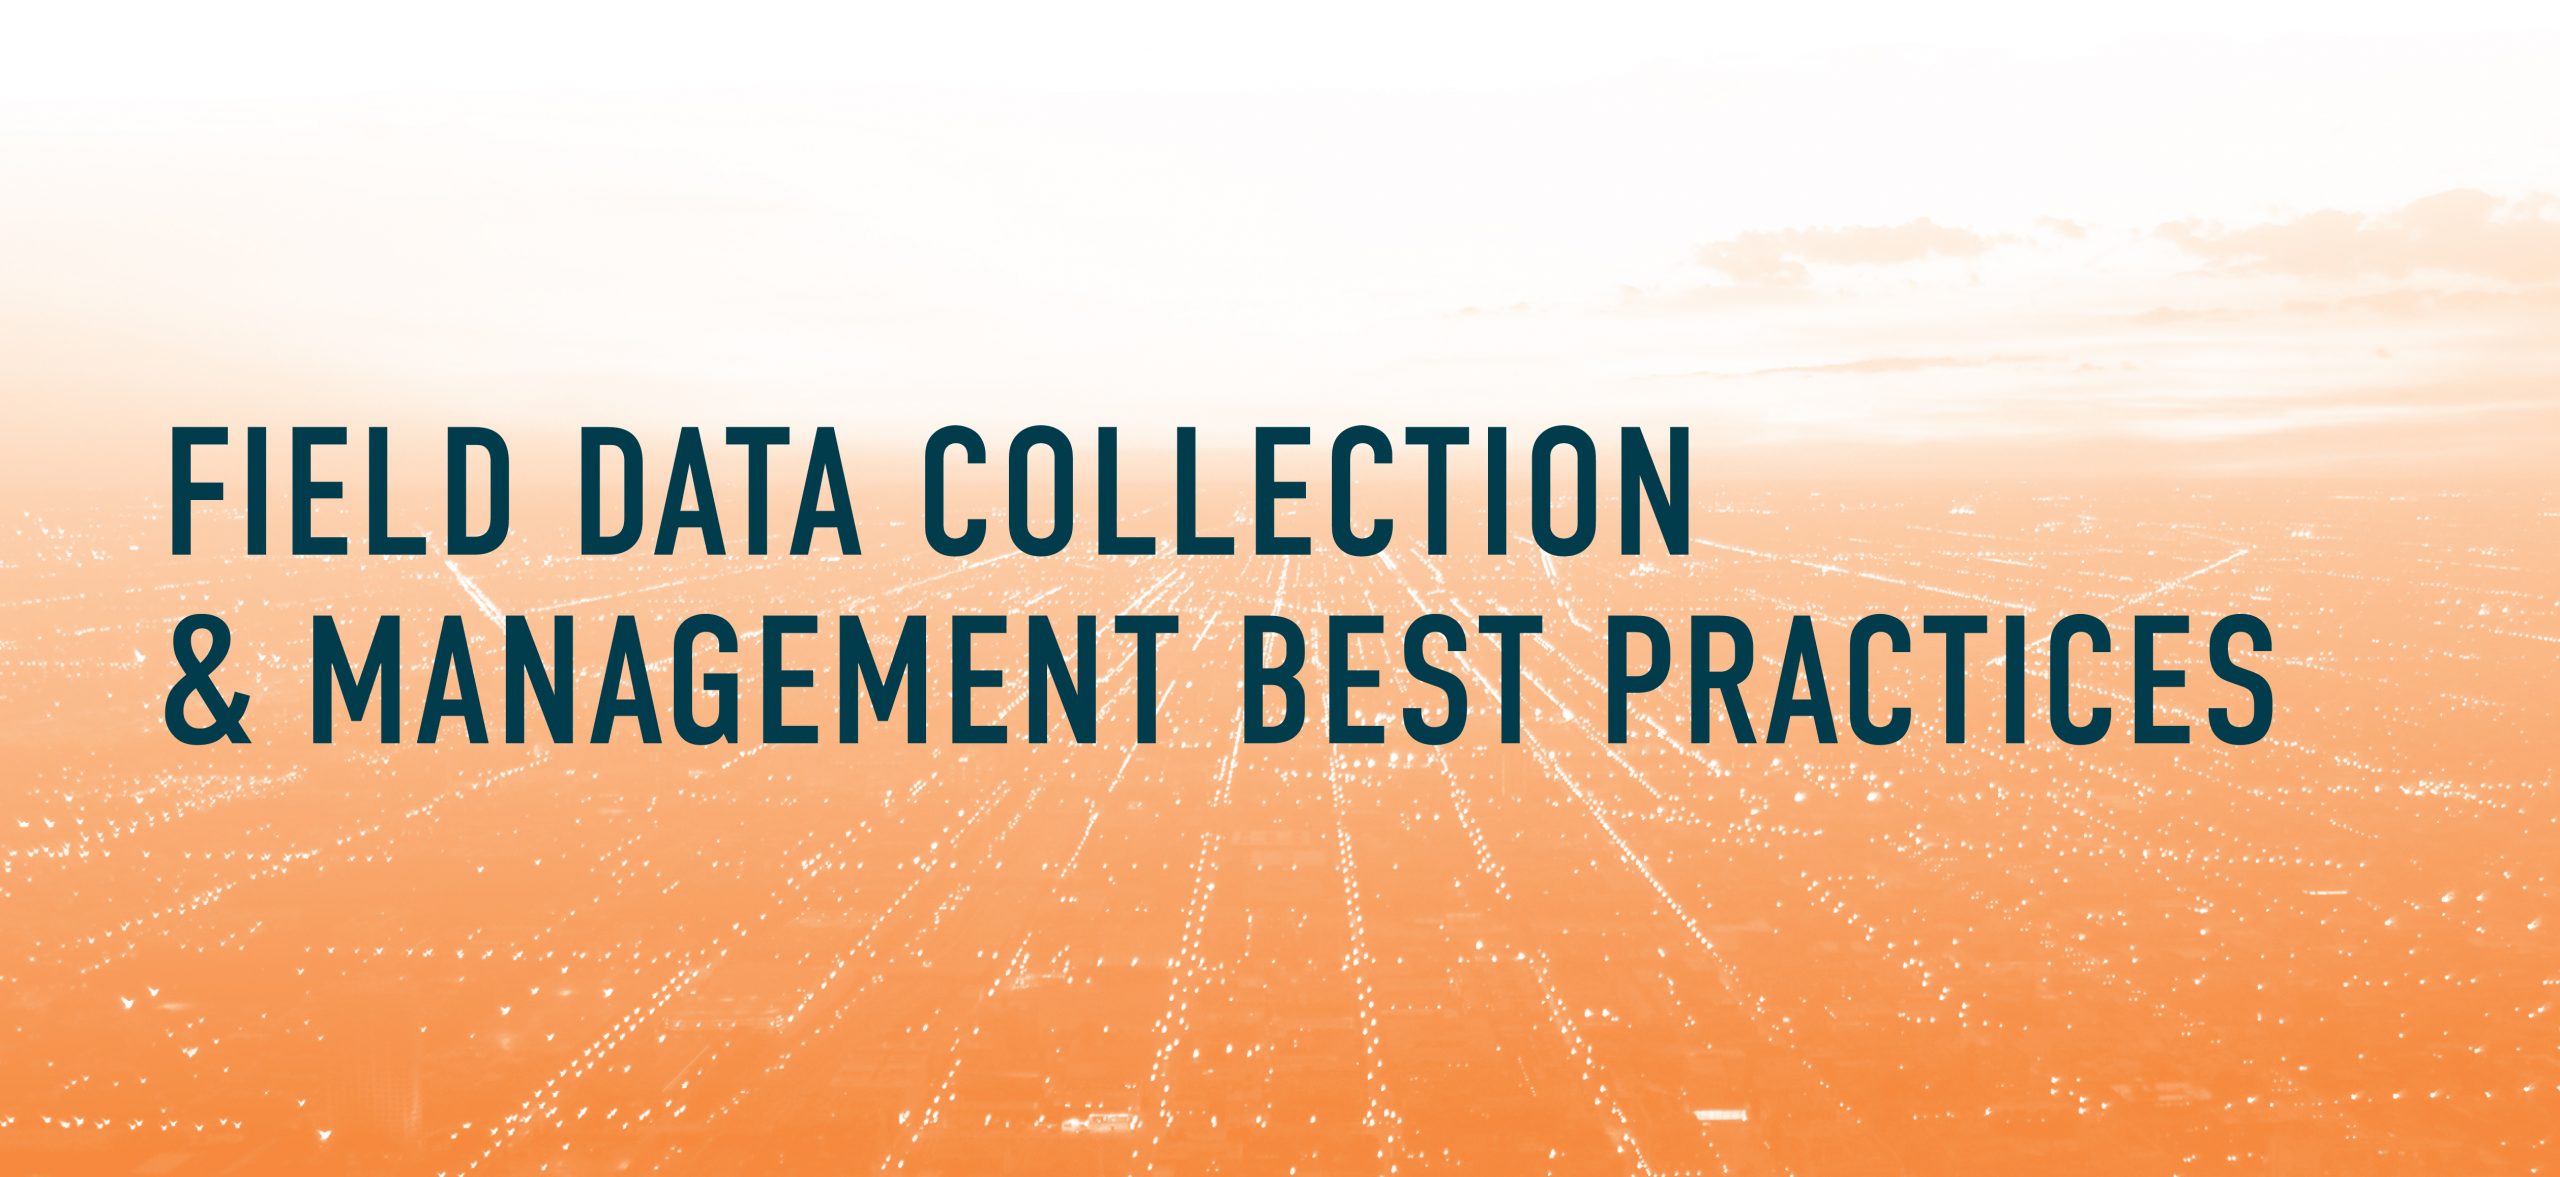 Field Data Collection and Management Best Practices